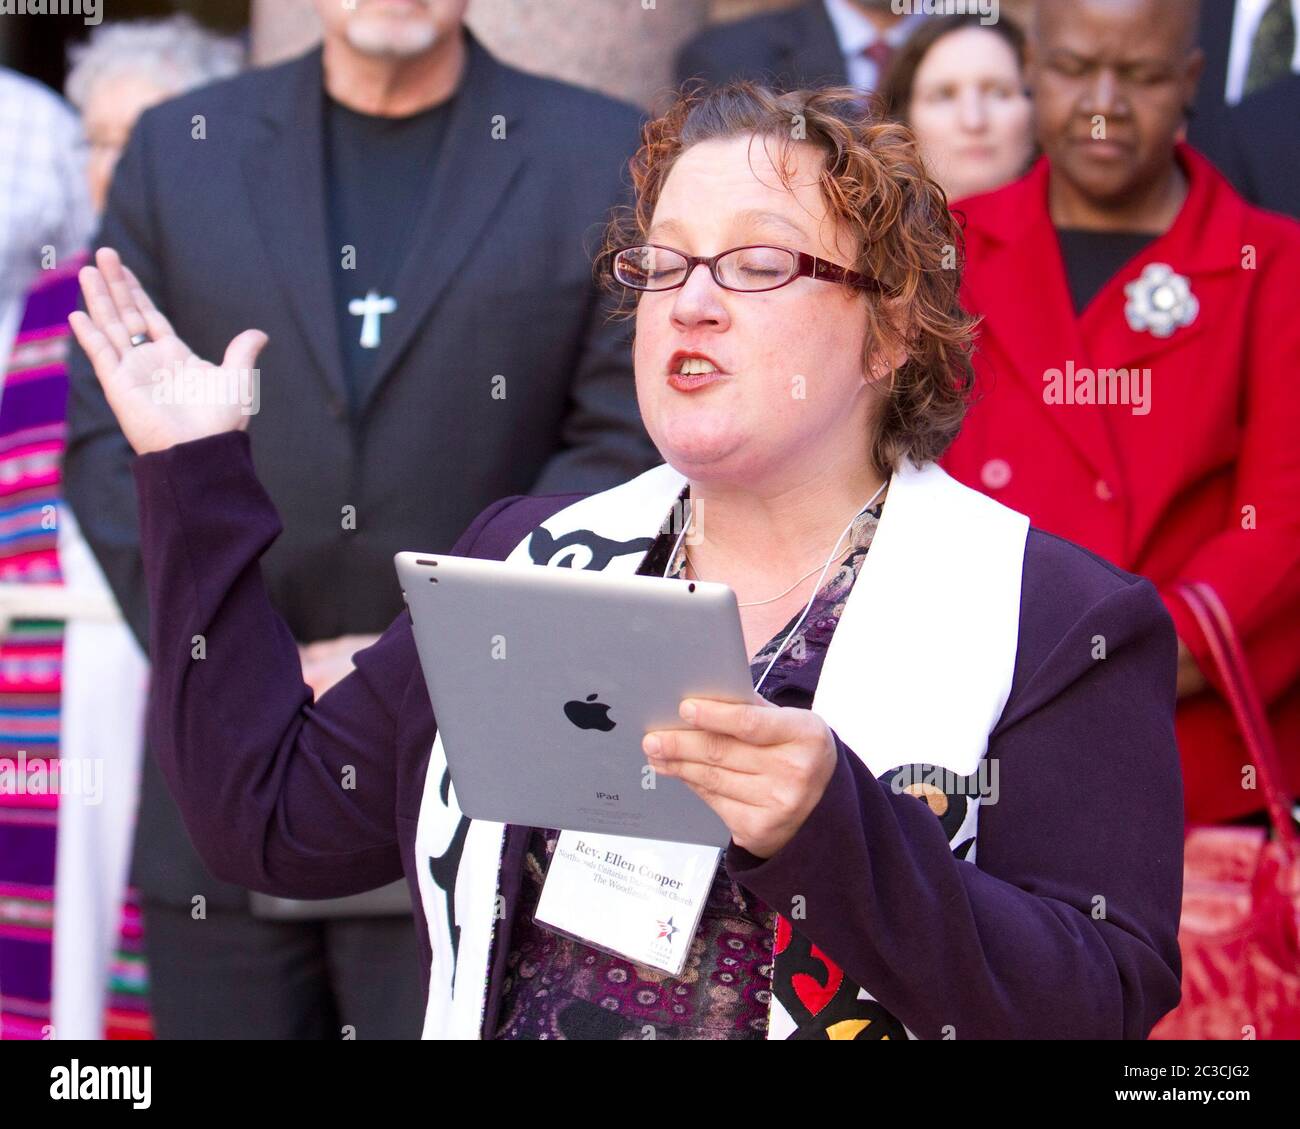 Austin, Texas USA, February 2013: Female minister, reading a prayer on iPad tablet computer, and other clergy members urge Texas legislators to restore funding for family planning and birth-control services for low-income women during a press conference at the Texas Capitol. Texas Faith in Action and the Texas Freedom Network are nonpartisan, grassroots organization of religious and community leaders. ©MKC/Bob Daemmrich Photography, Inc. Stock Photo